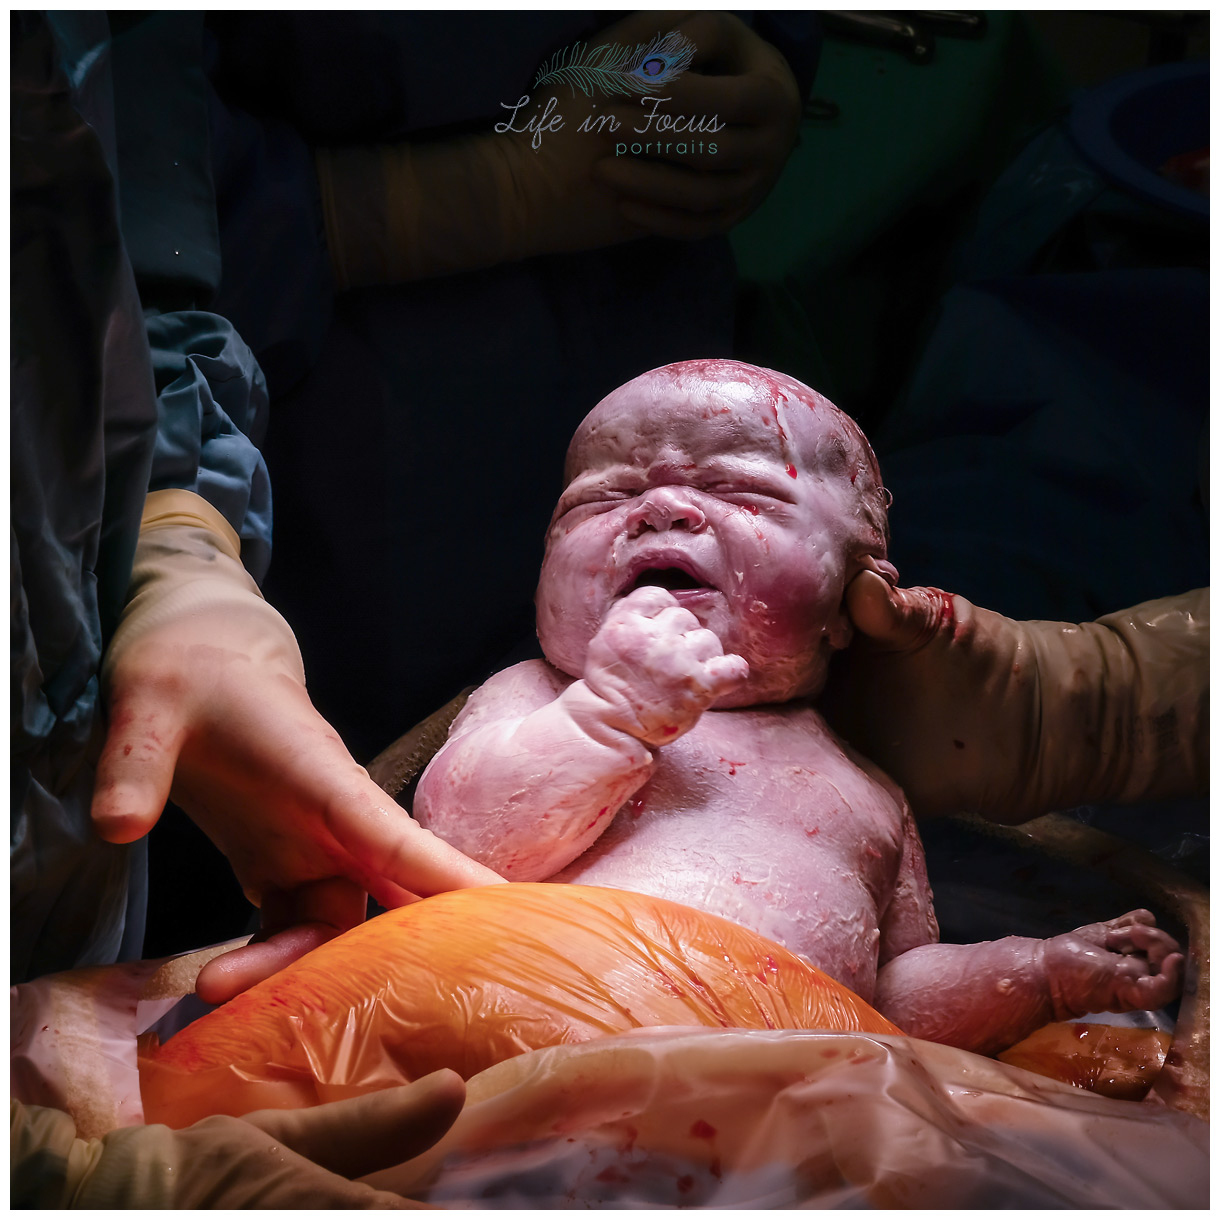 caesarian section delivery Life in Focus Portraits birth photography Rhu Argyll and Bute